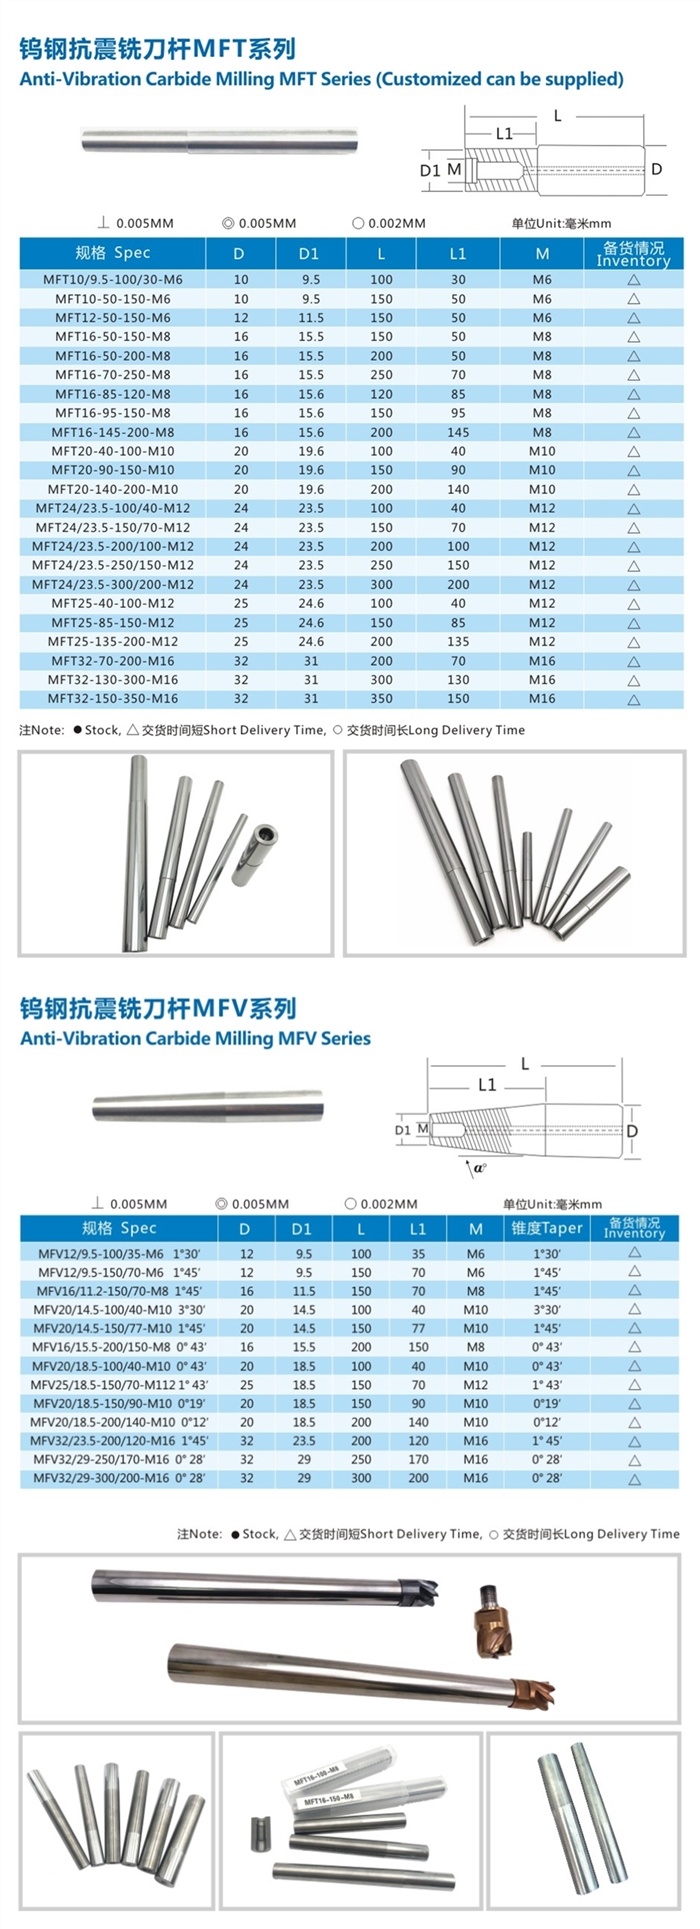 Tungsten Cemented Carbide Milling Tool Holders Carbide Boring Bar